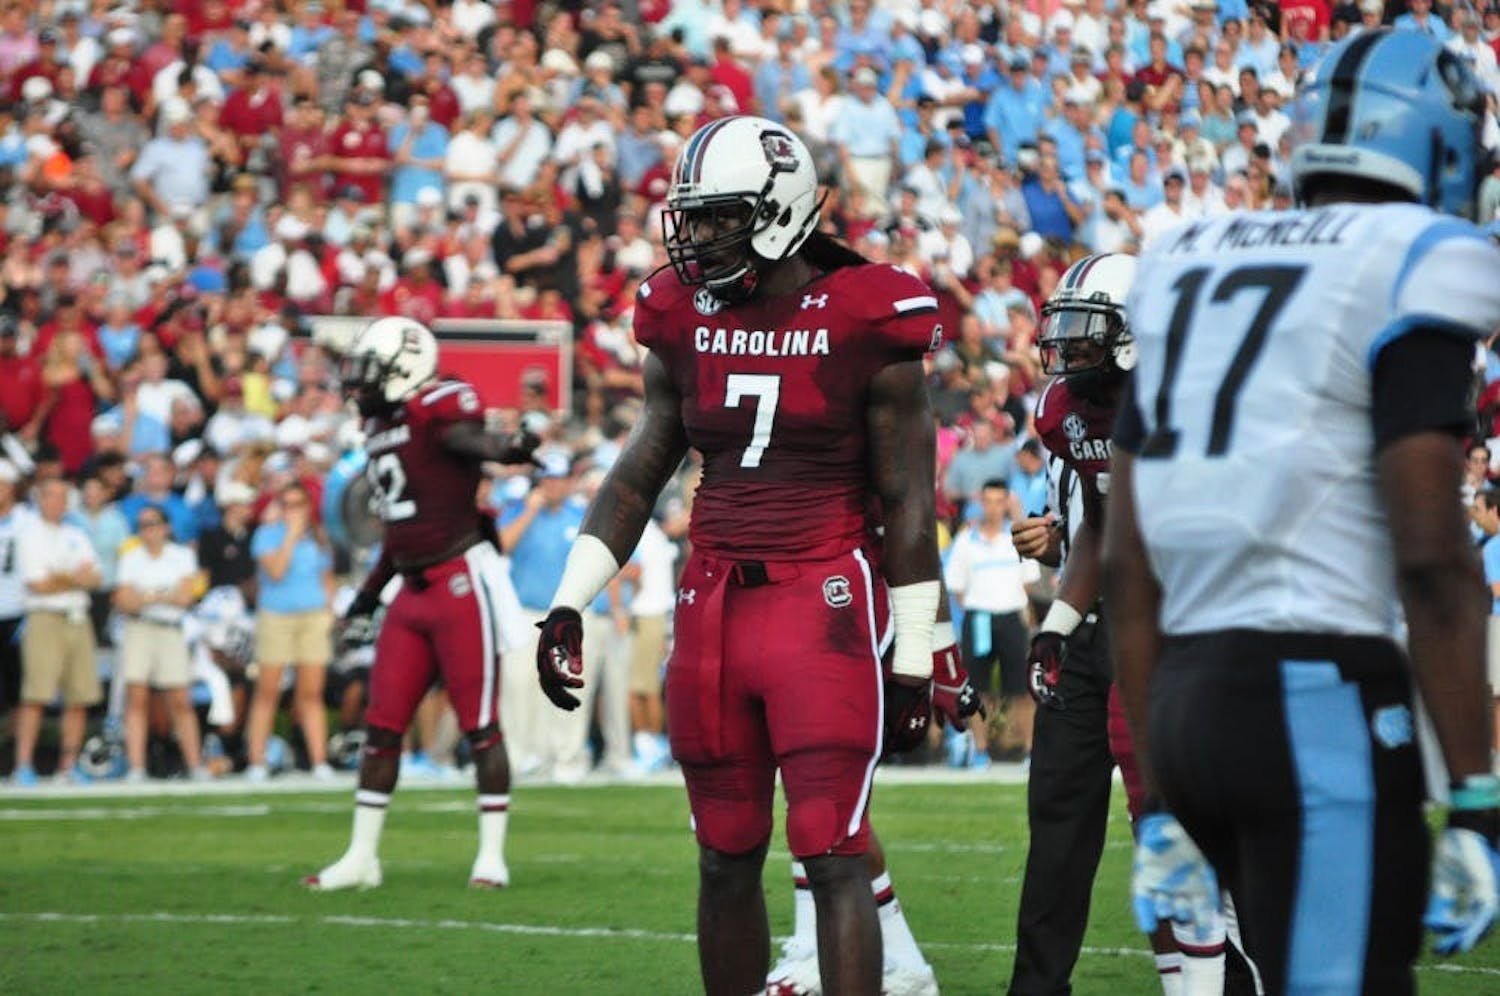 FILE — Junior defensive end Jadeveon Clowney on the field at Williams-Brice Stadium in Columbia, SC. The Gamecocks defeated the Tar Heels on Aug. 30, 2013.